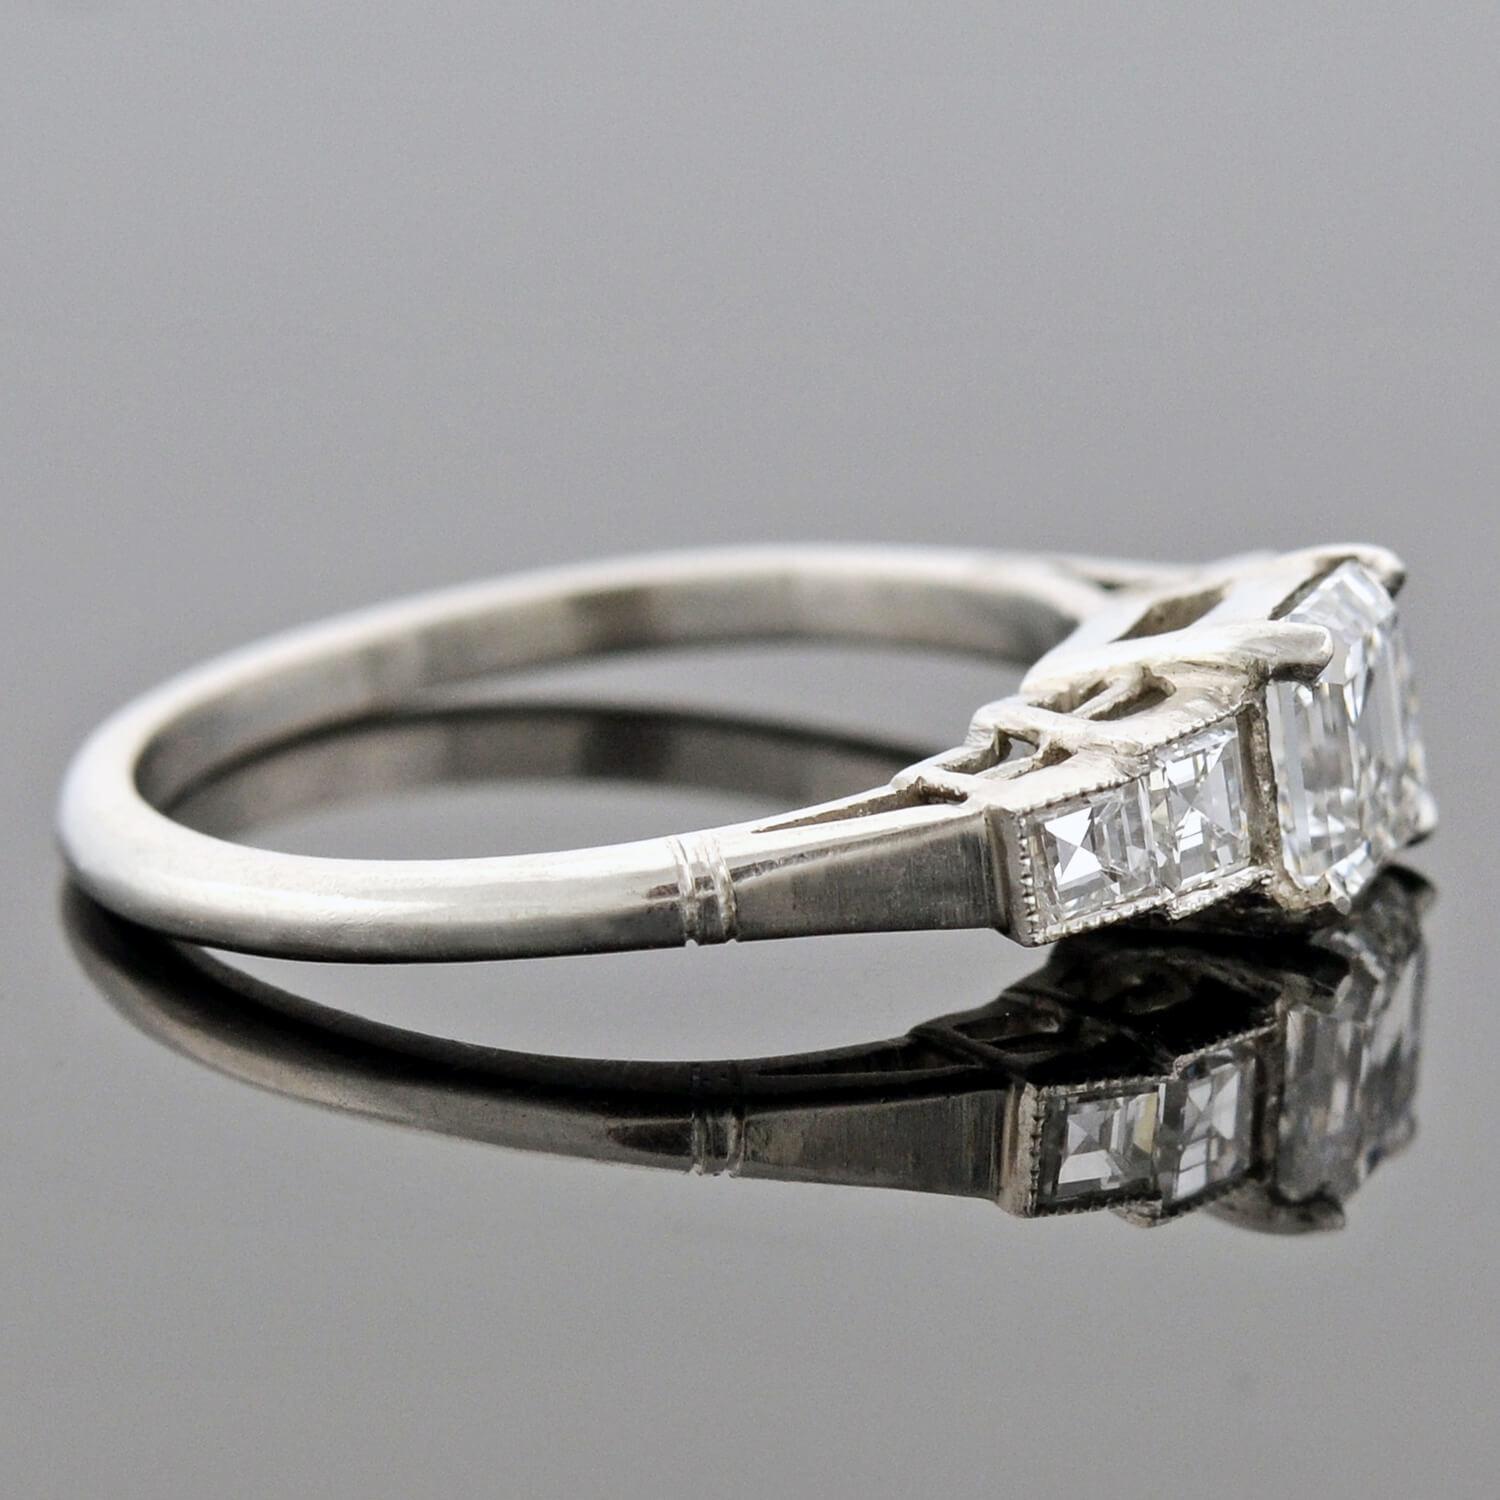 A stunning diamond engagement ring from the late Art Deco (ca1930s) era! This gorgeous platinum ring frames a 1.03ct Asscher Cut (also known as a Square Emerald Cut) diamond at the center. The stone is held within a 4-prong setting, and is graded